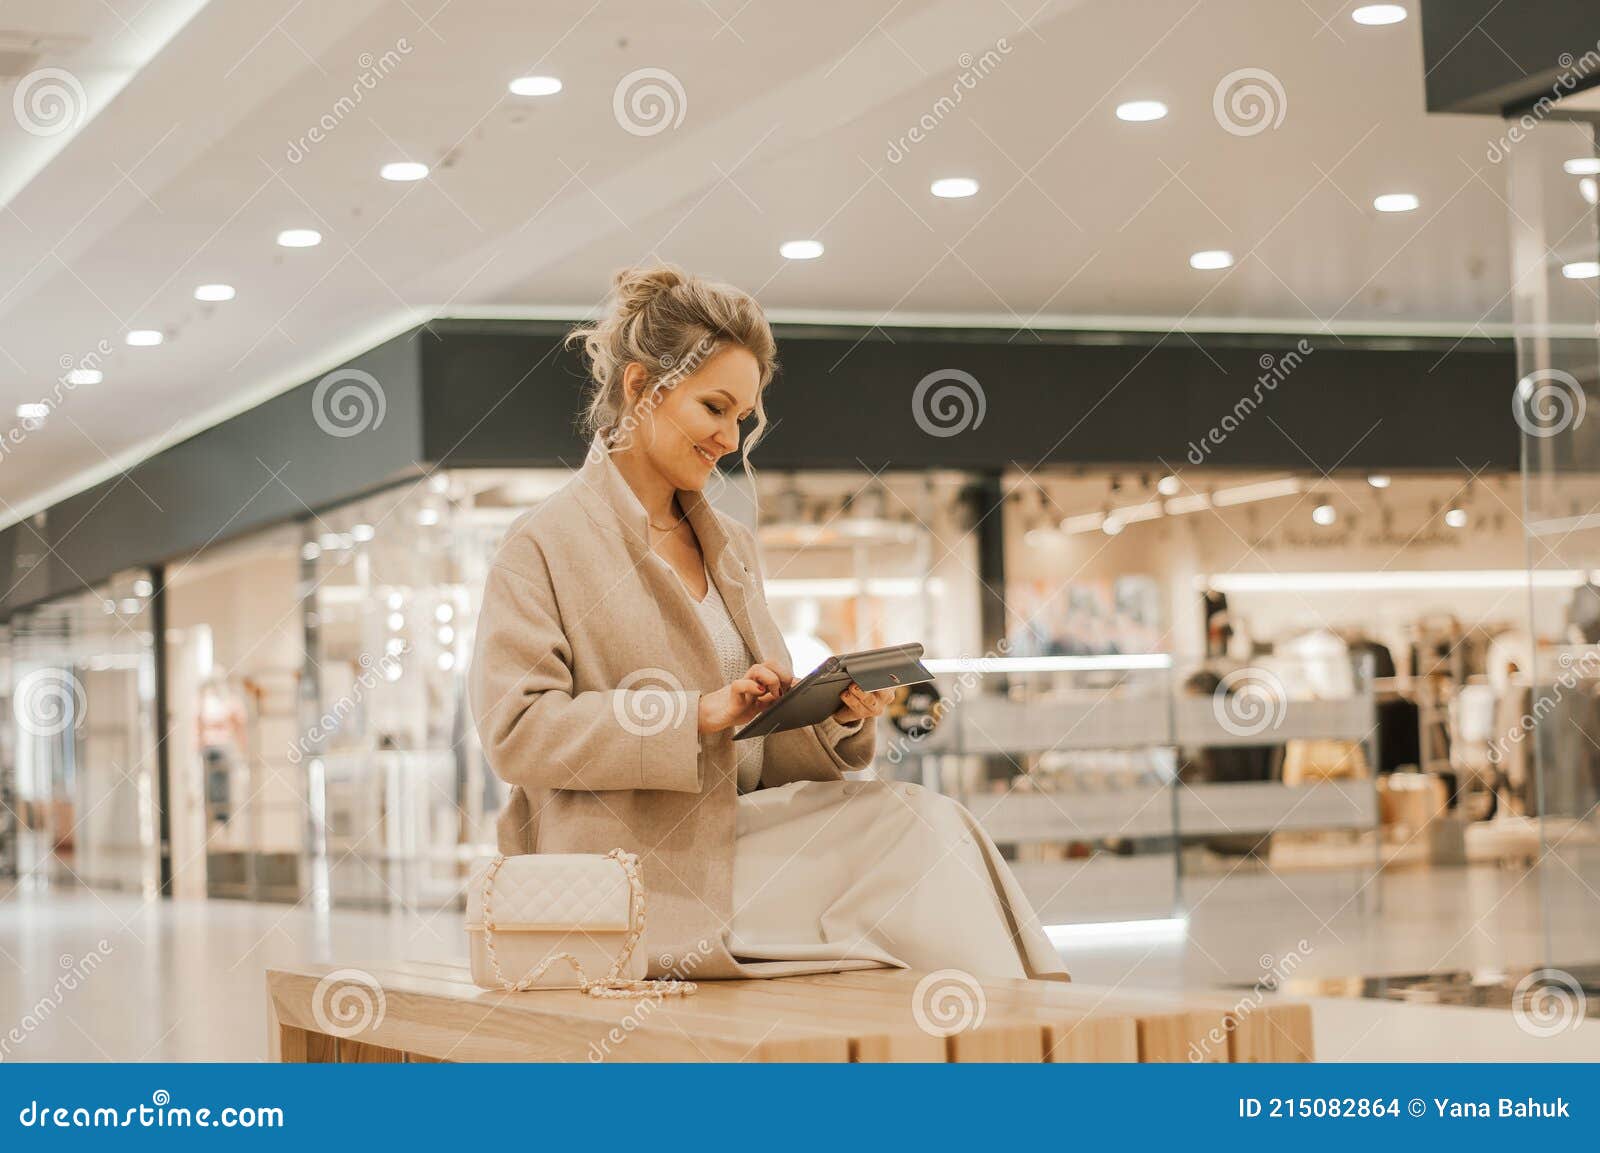 the concept of protection from coronavirus while shopping. a young girl makes an online purchase through a tablet